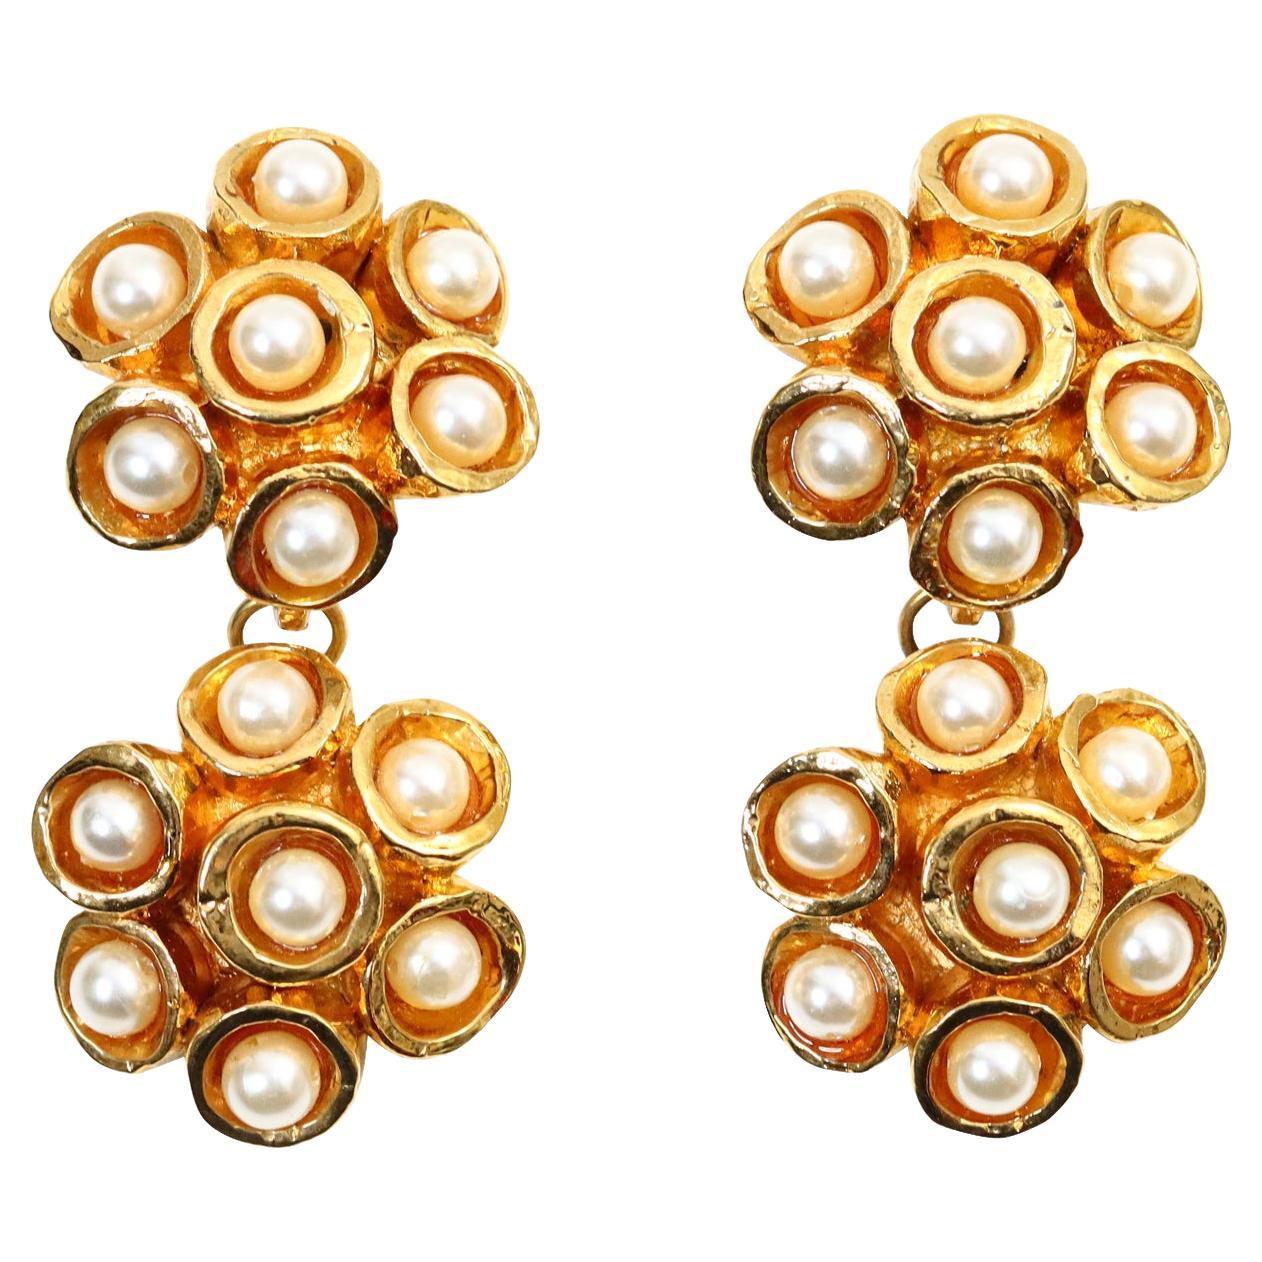 Vintage Alexis Lahellec Gold Honeycomb Faux Pearl Dangling Earrings, circa 1980s For Sale